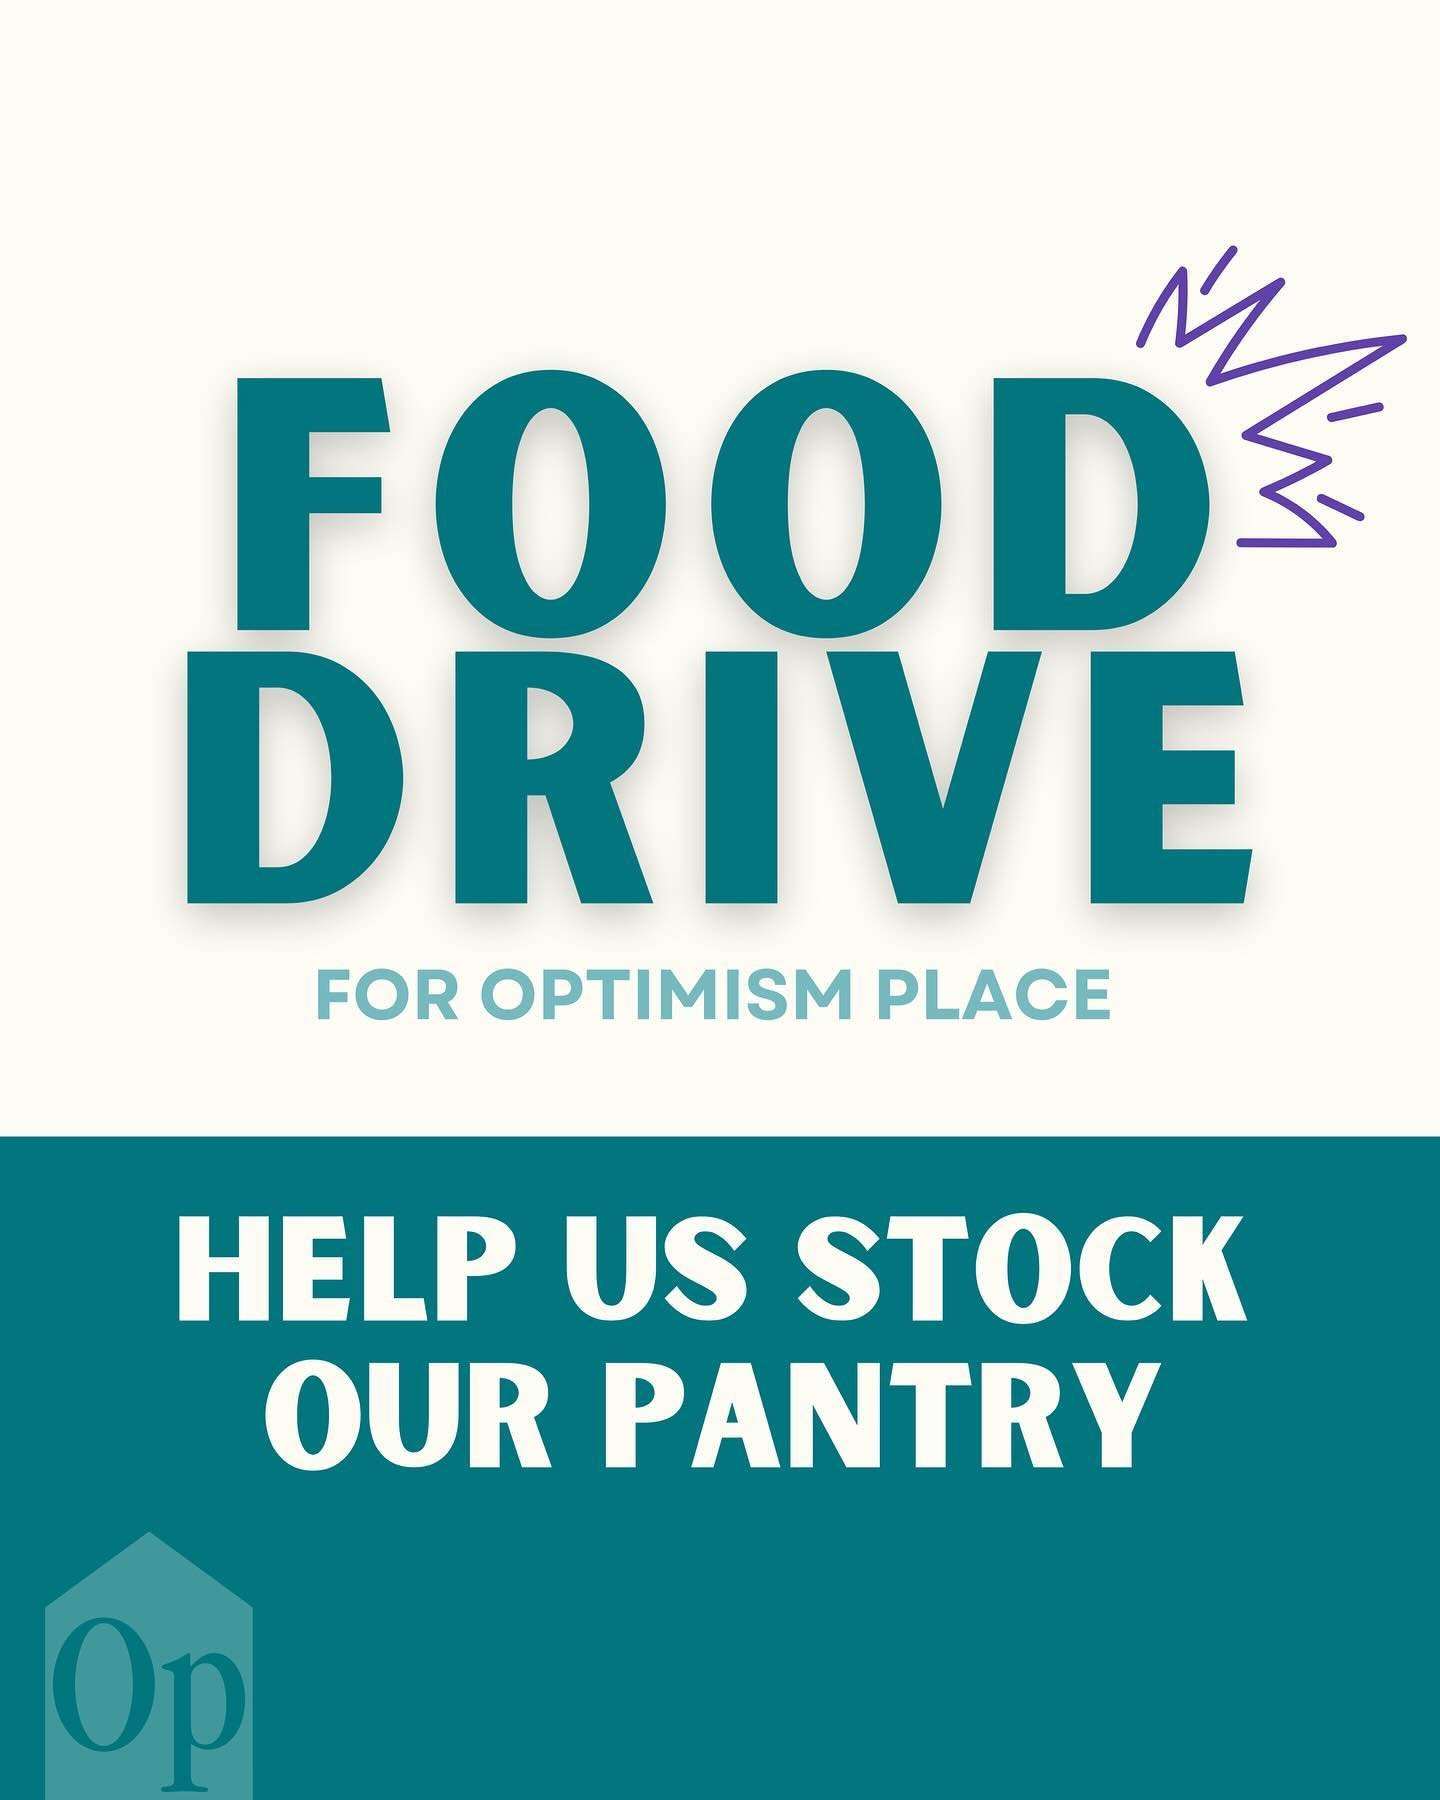 We need your help! Our pantry could use a restock ⬇️

💫 donate funds directly using the link in our bio
💫 shop our Amazon wish list and items will be sent directly to the shelter (link in bio)
💫 hold a food drive with your colleagues, teammates or